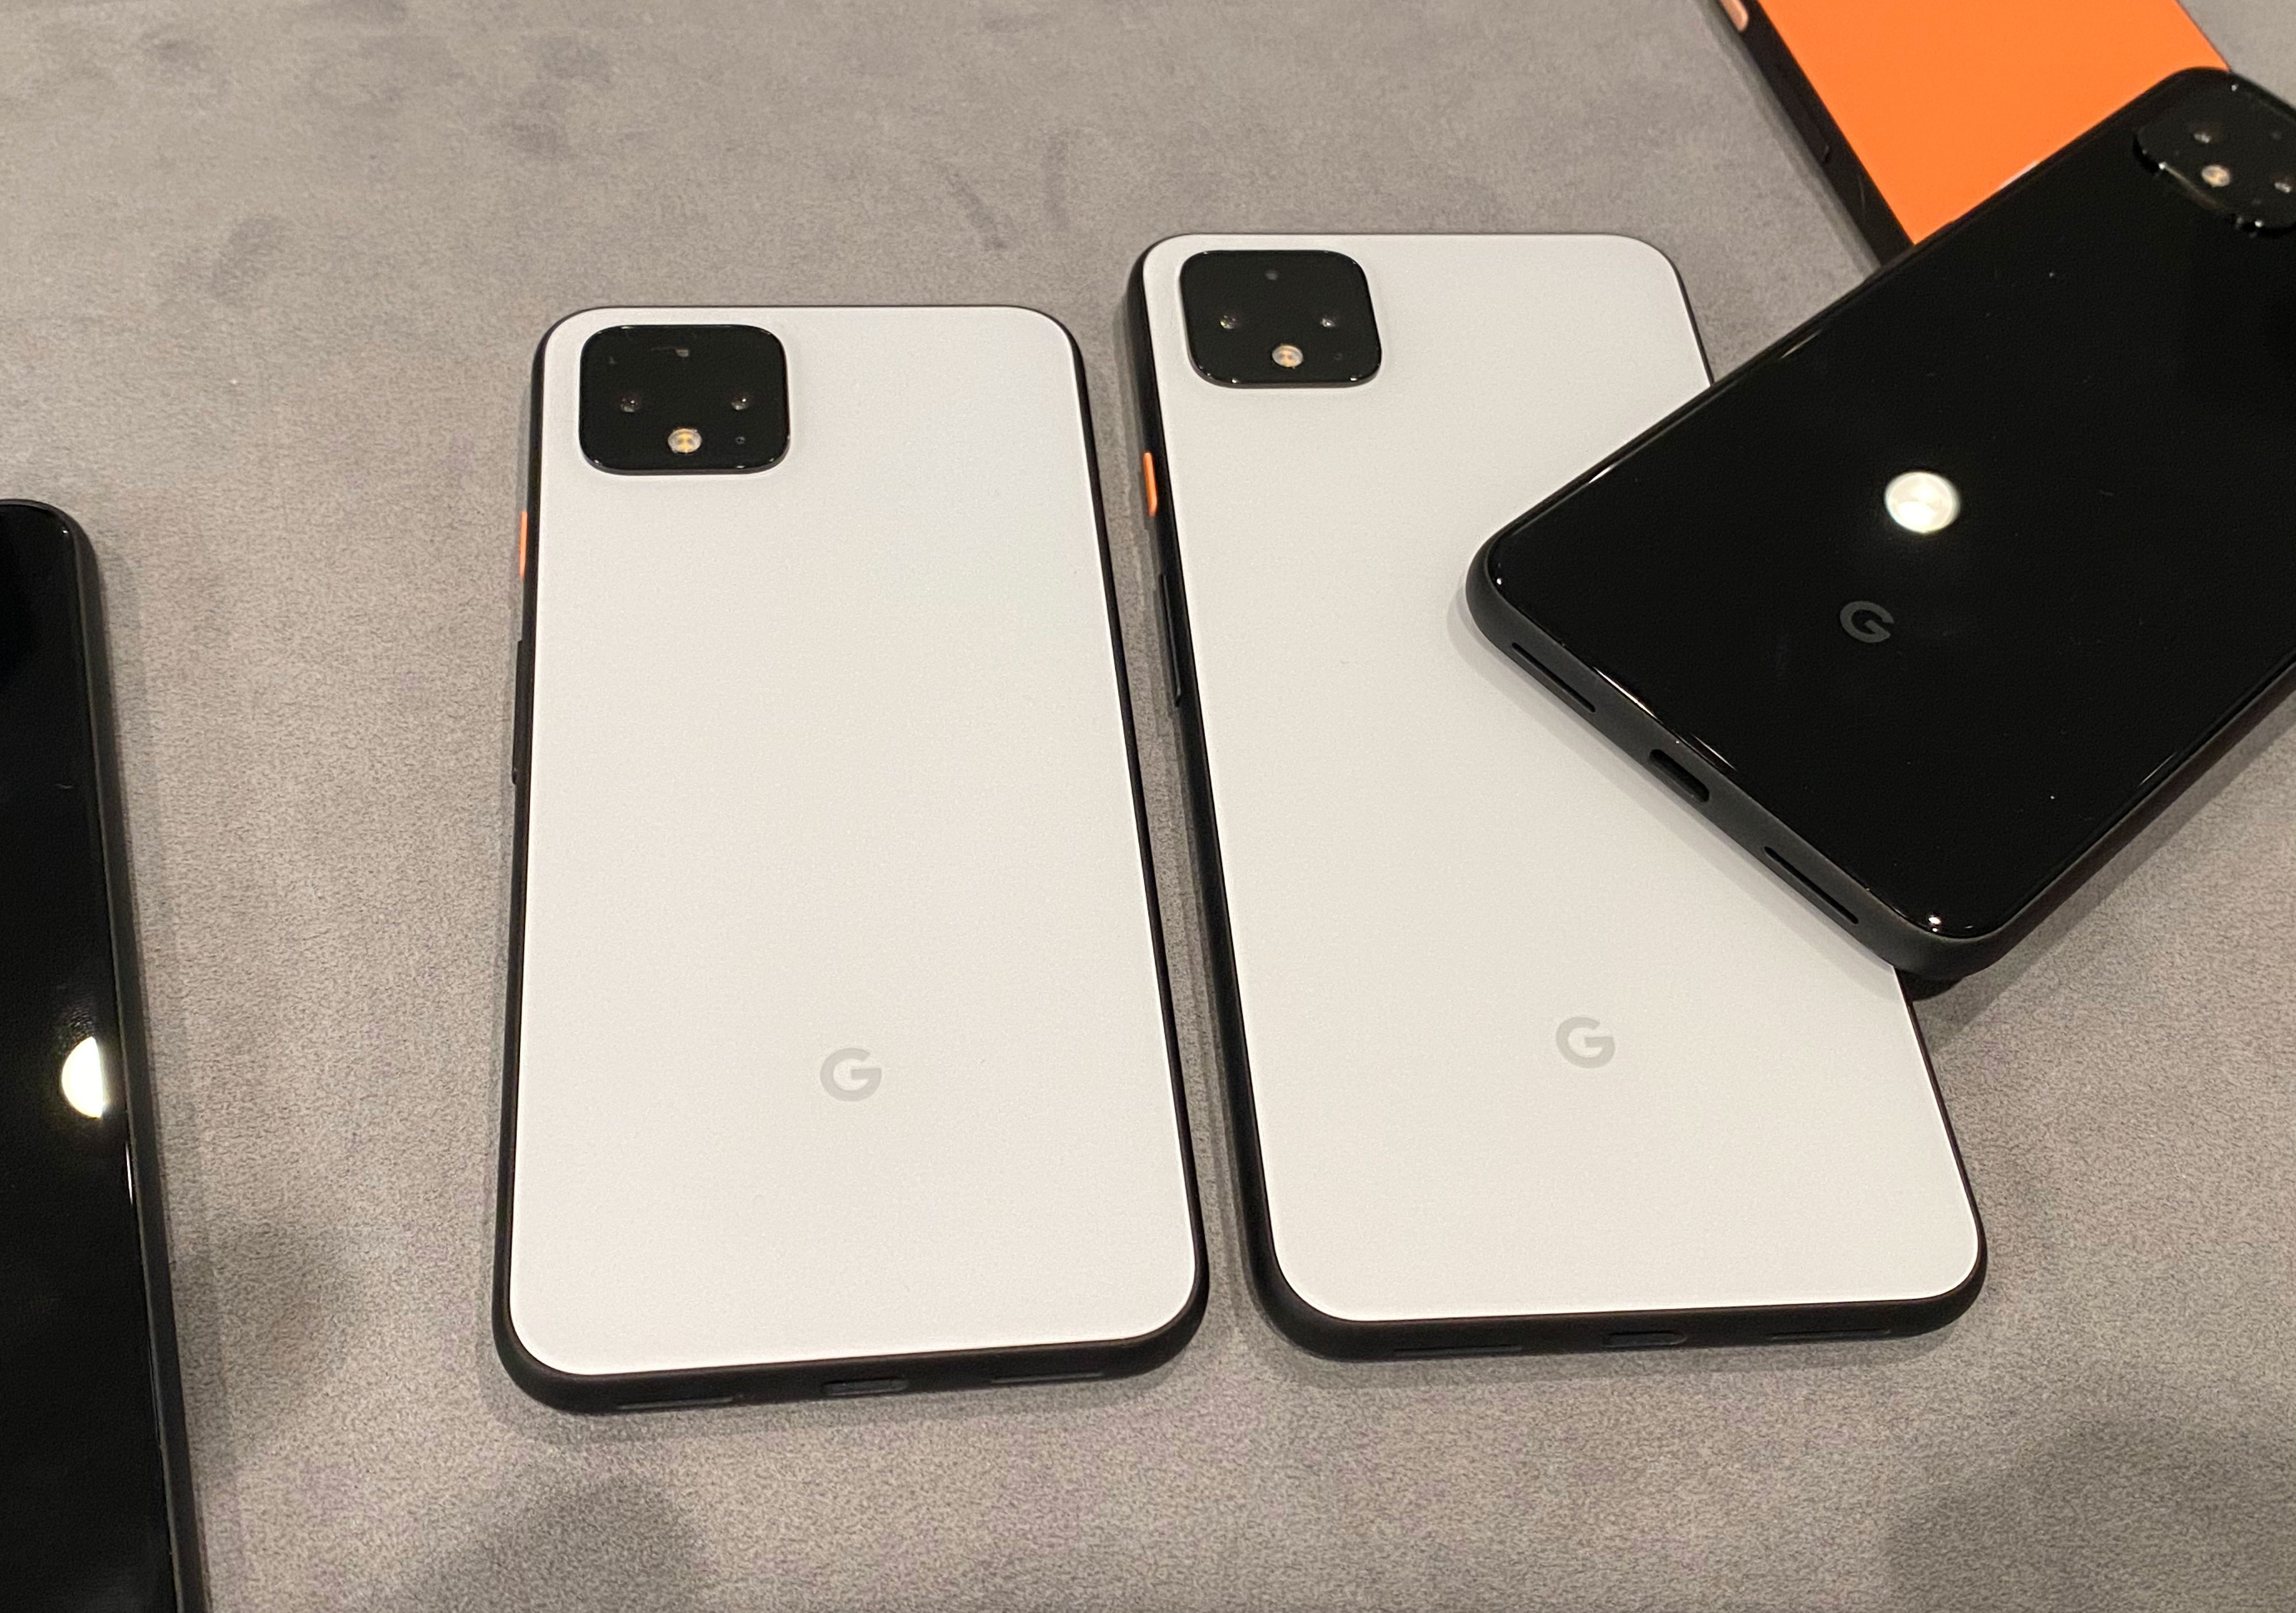 Google Pixel 4 and 4XL: More Cameras and Artificial Intelligence